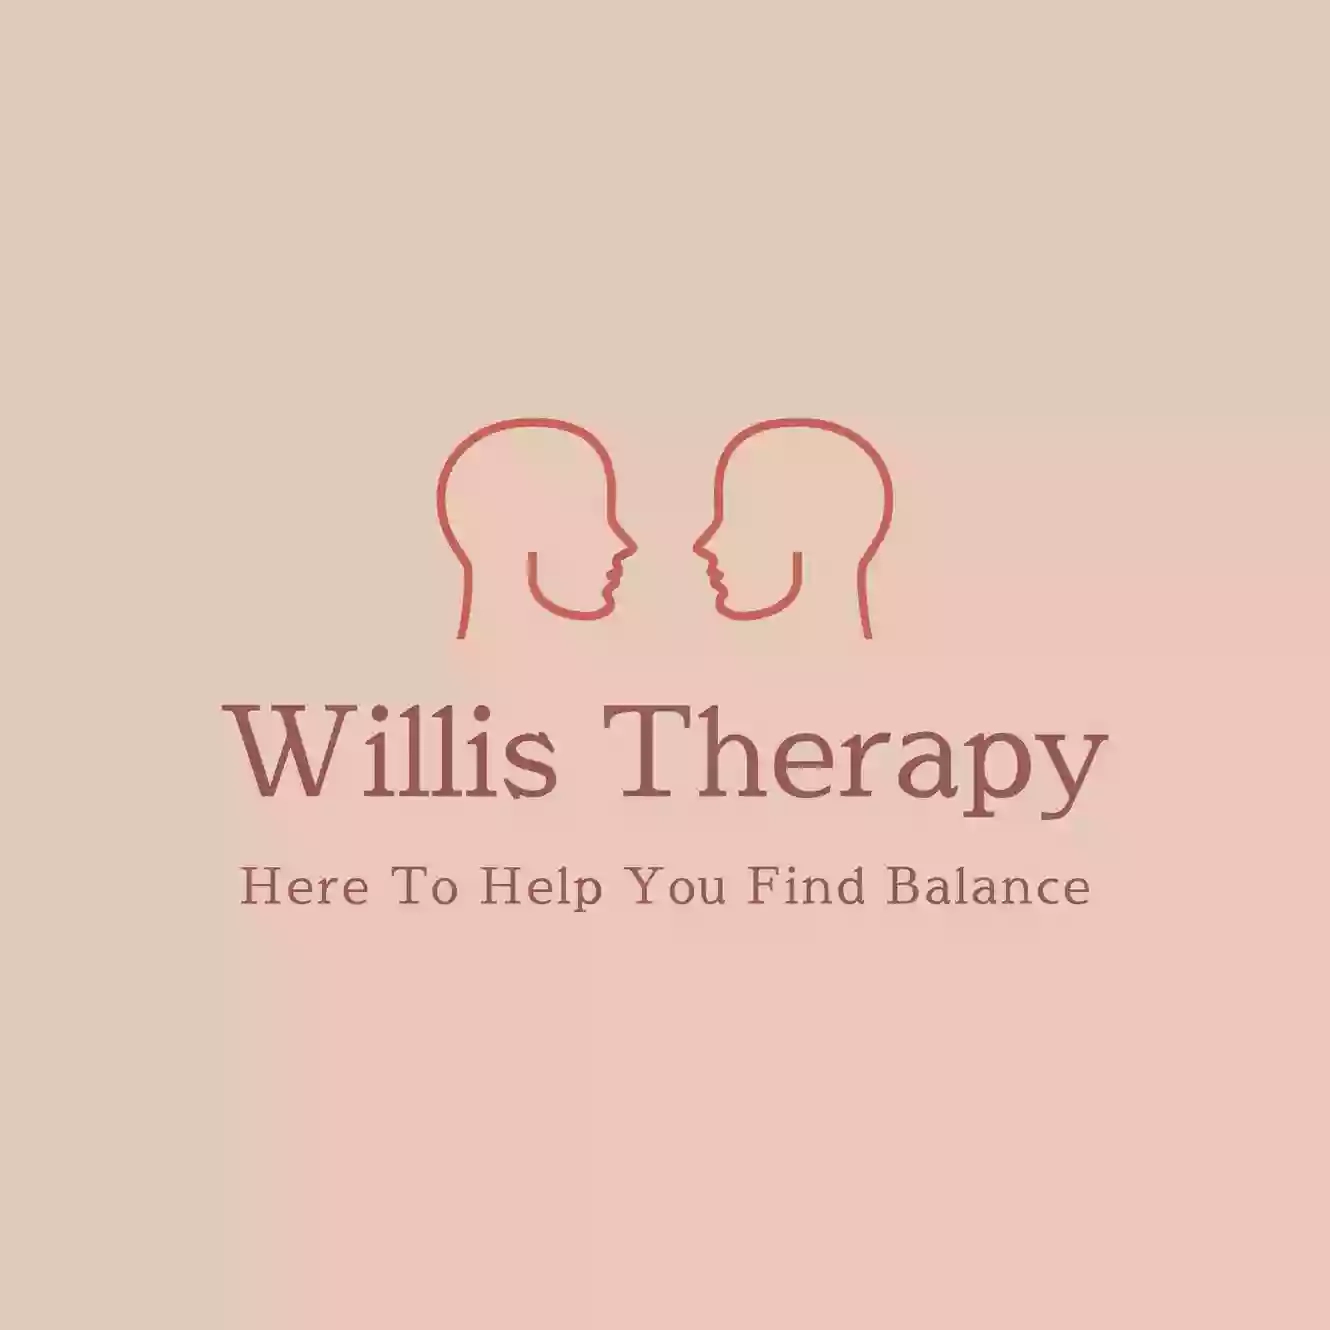 Willis Therapy